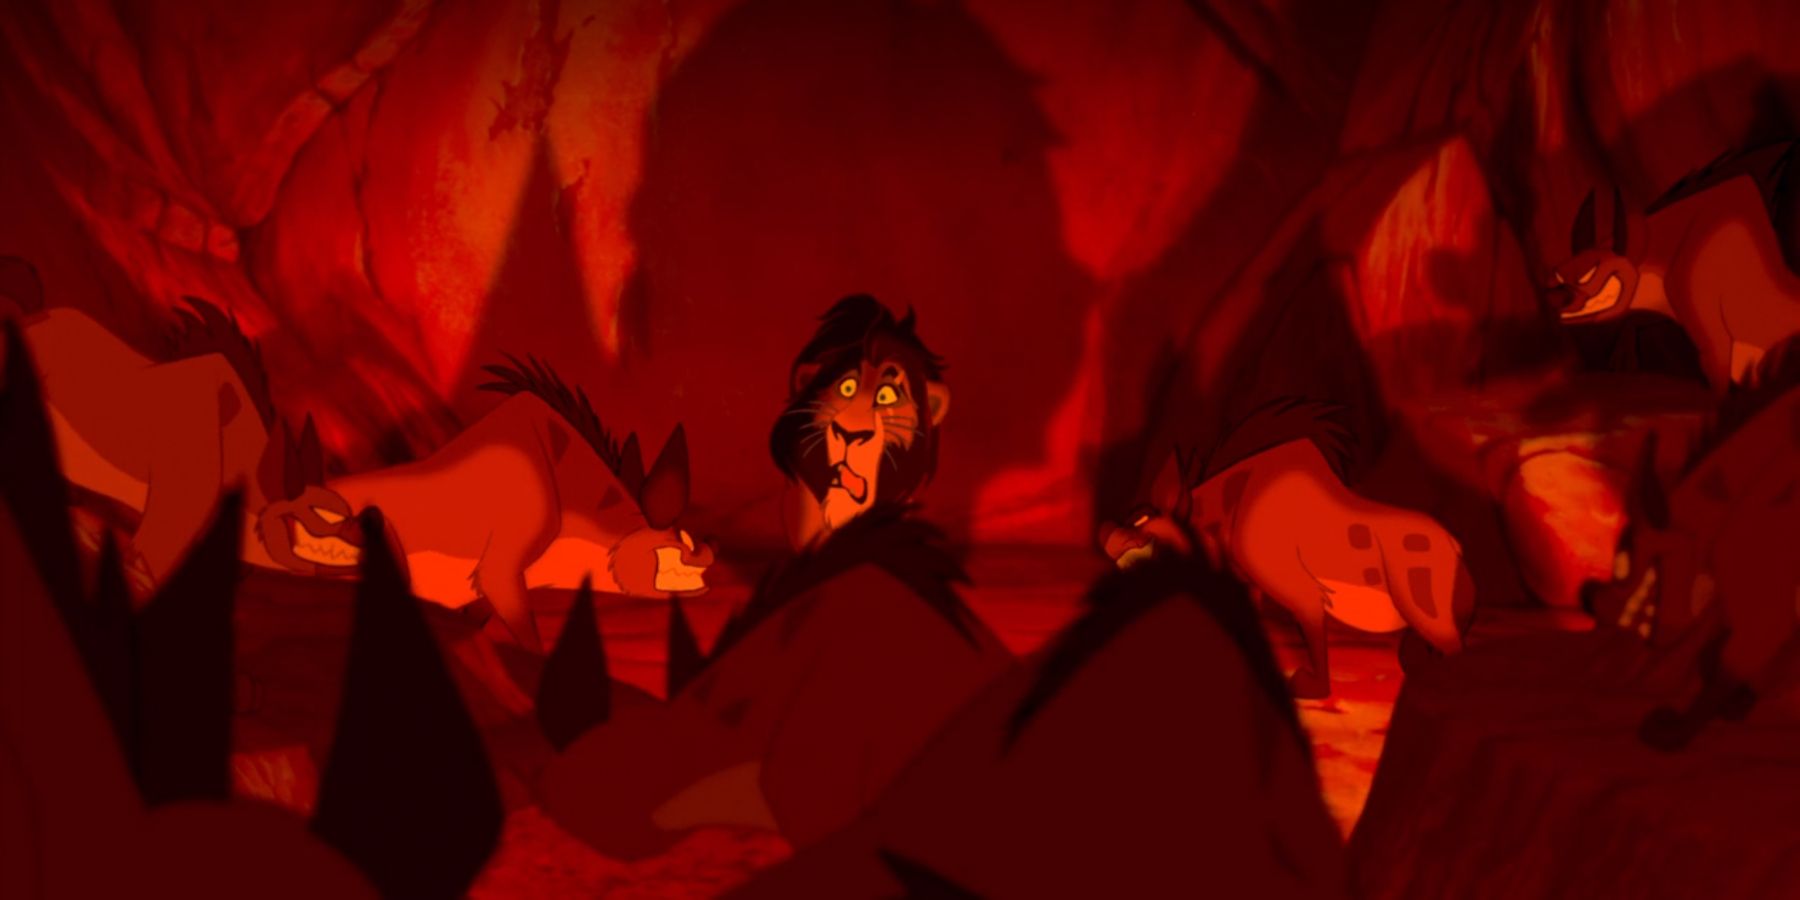 Scar being surrounded by hyenas in The Lion King